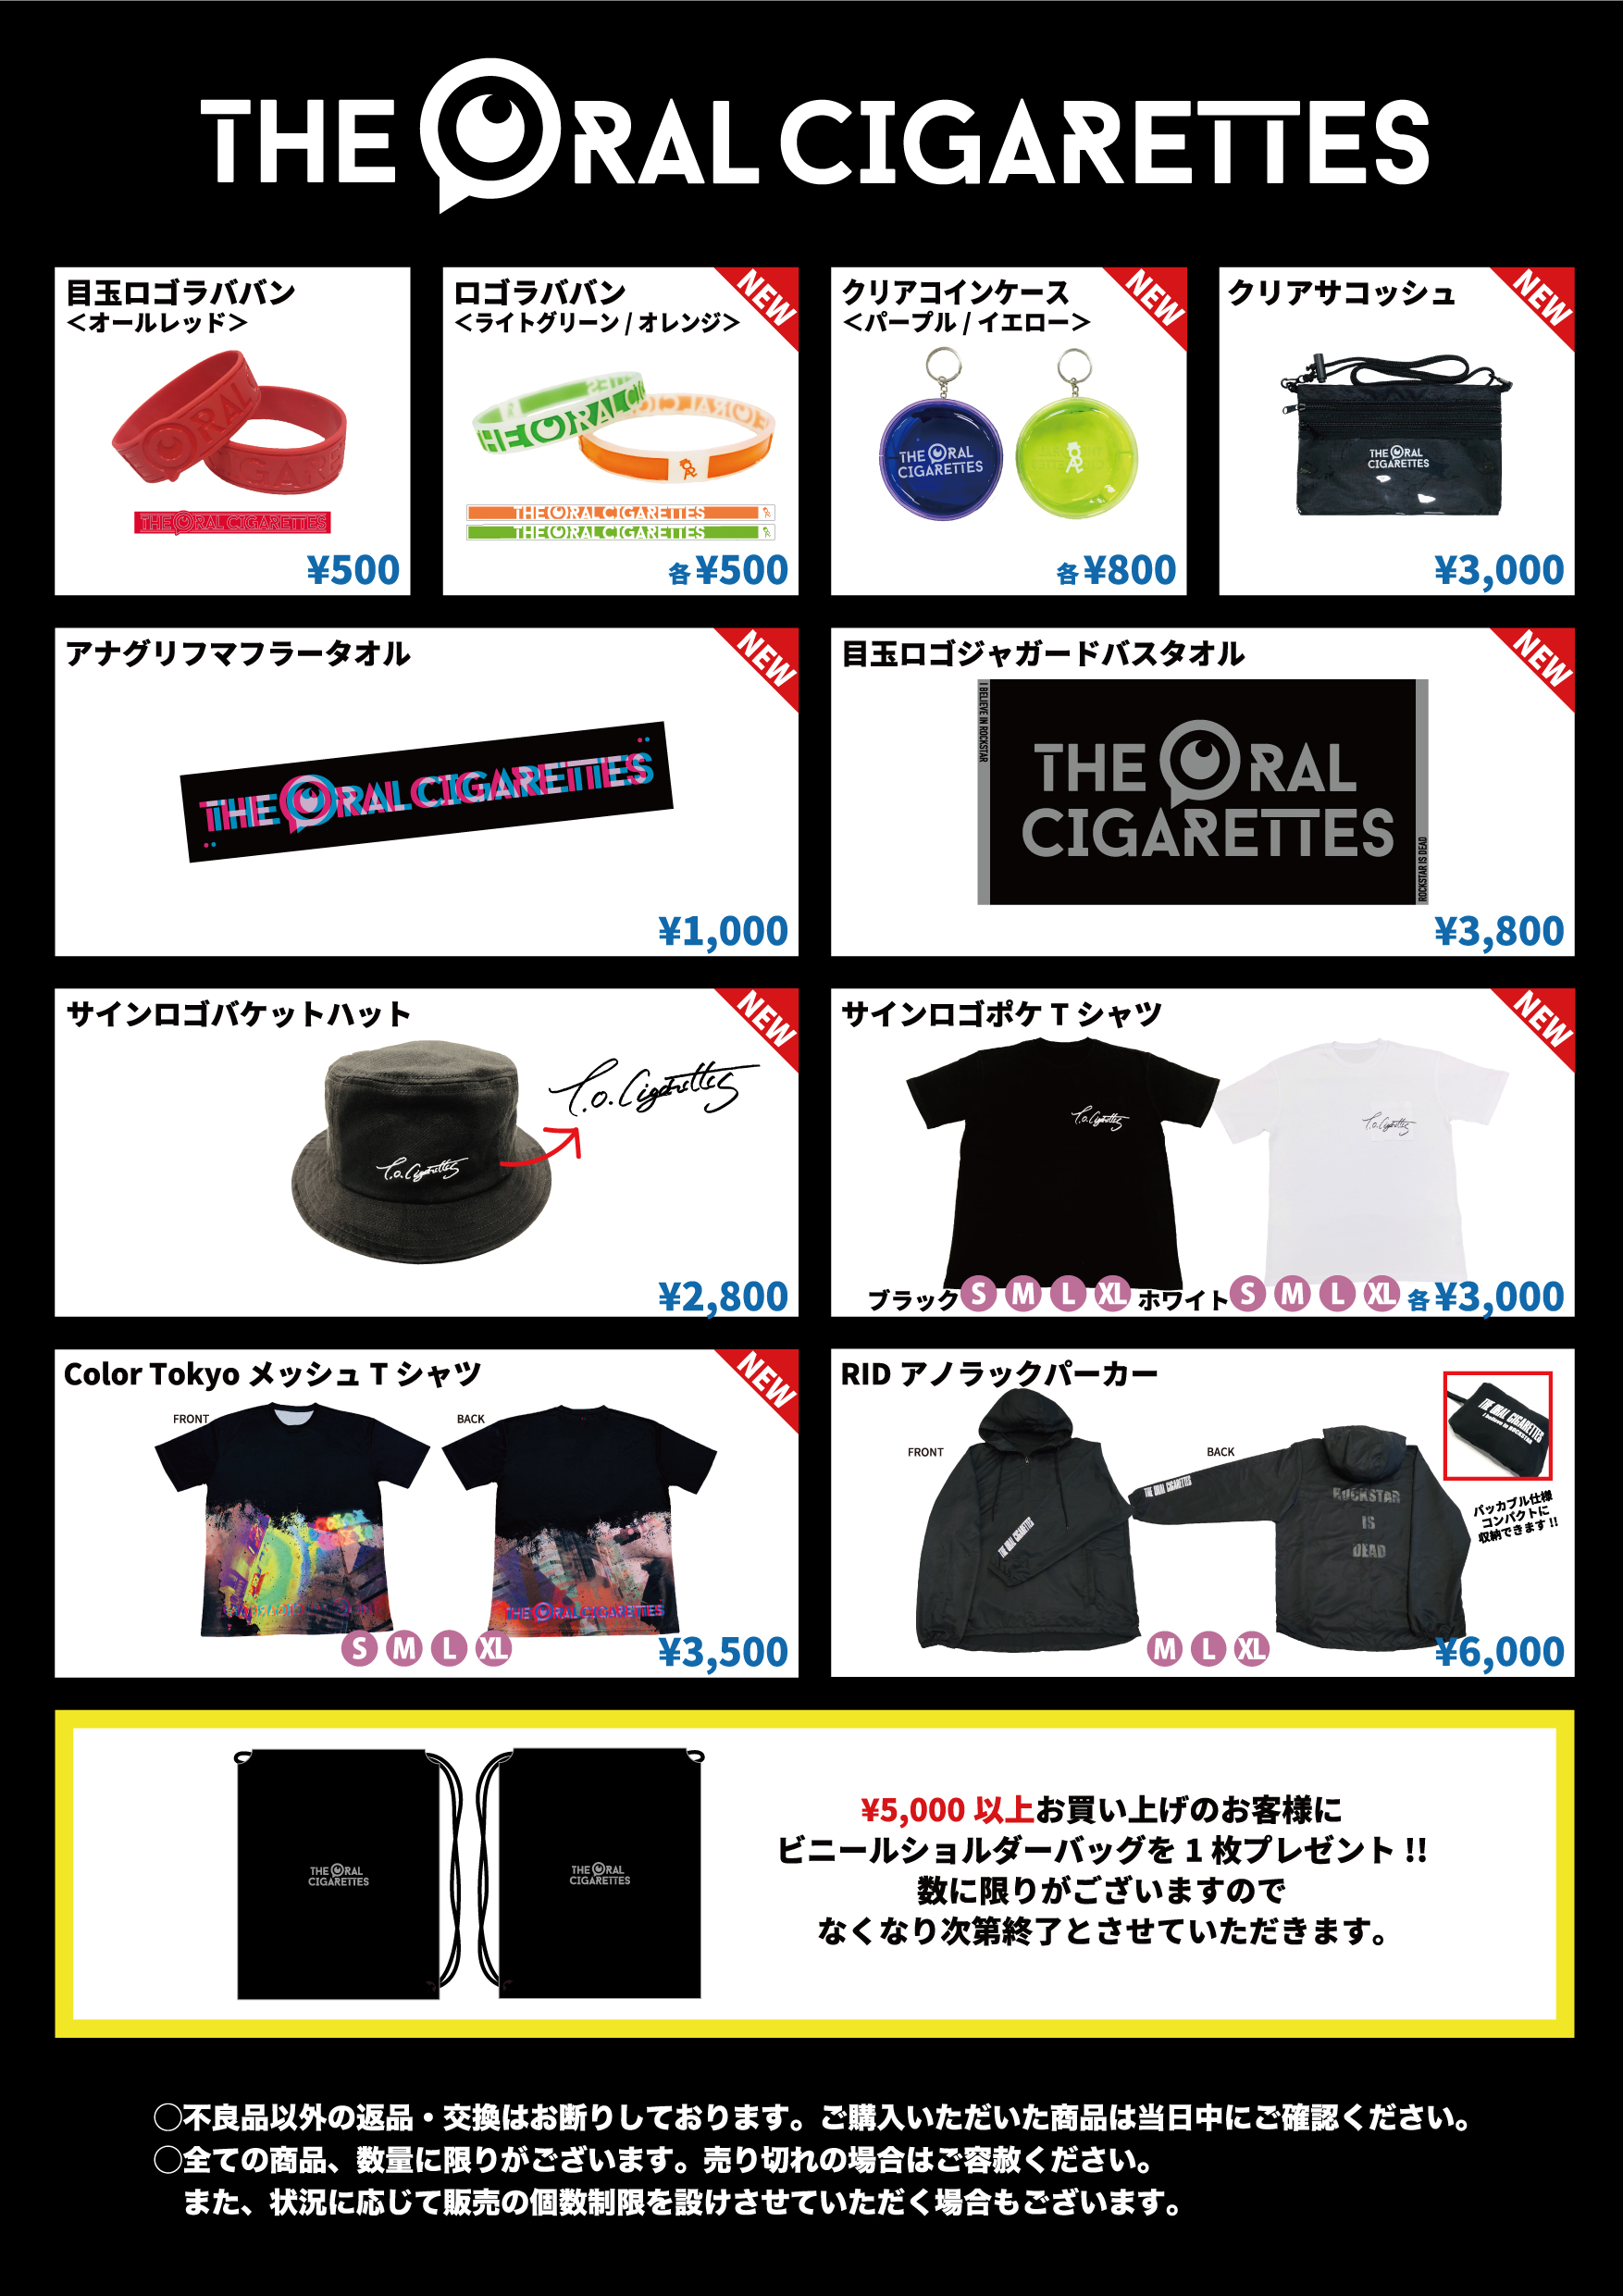 THE ORAL CIGARETTESグッズ各種